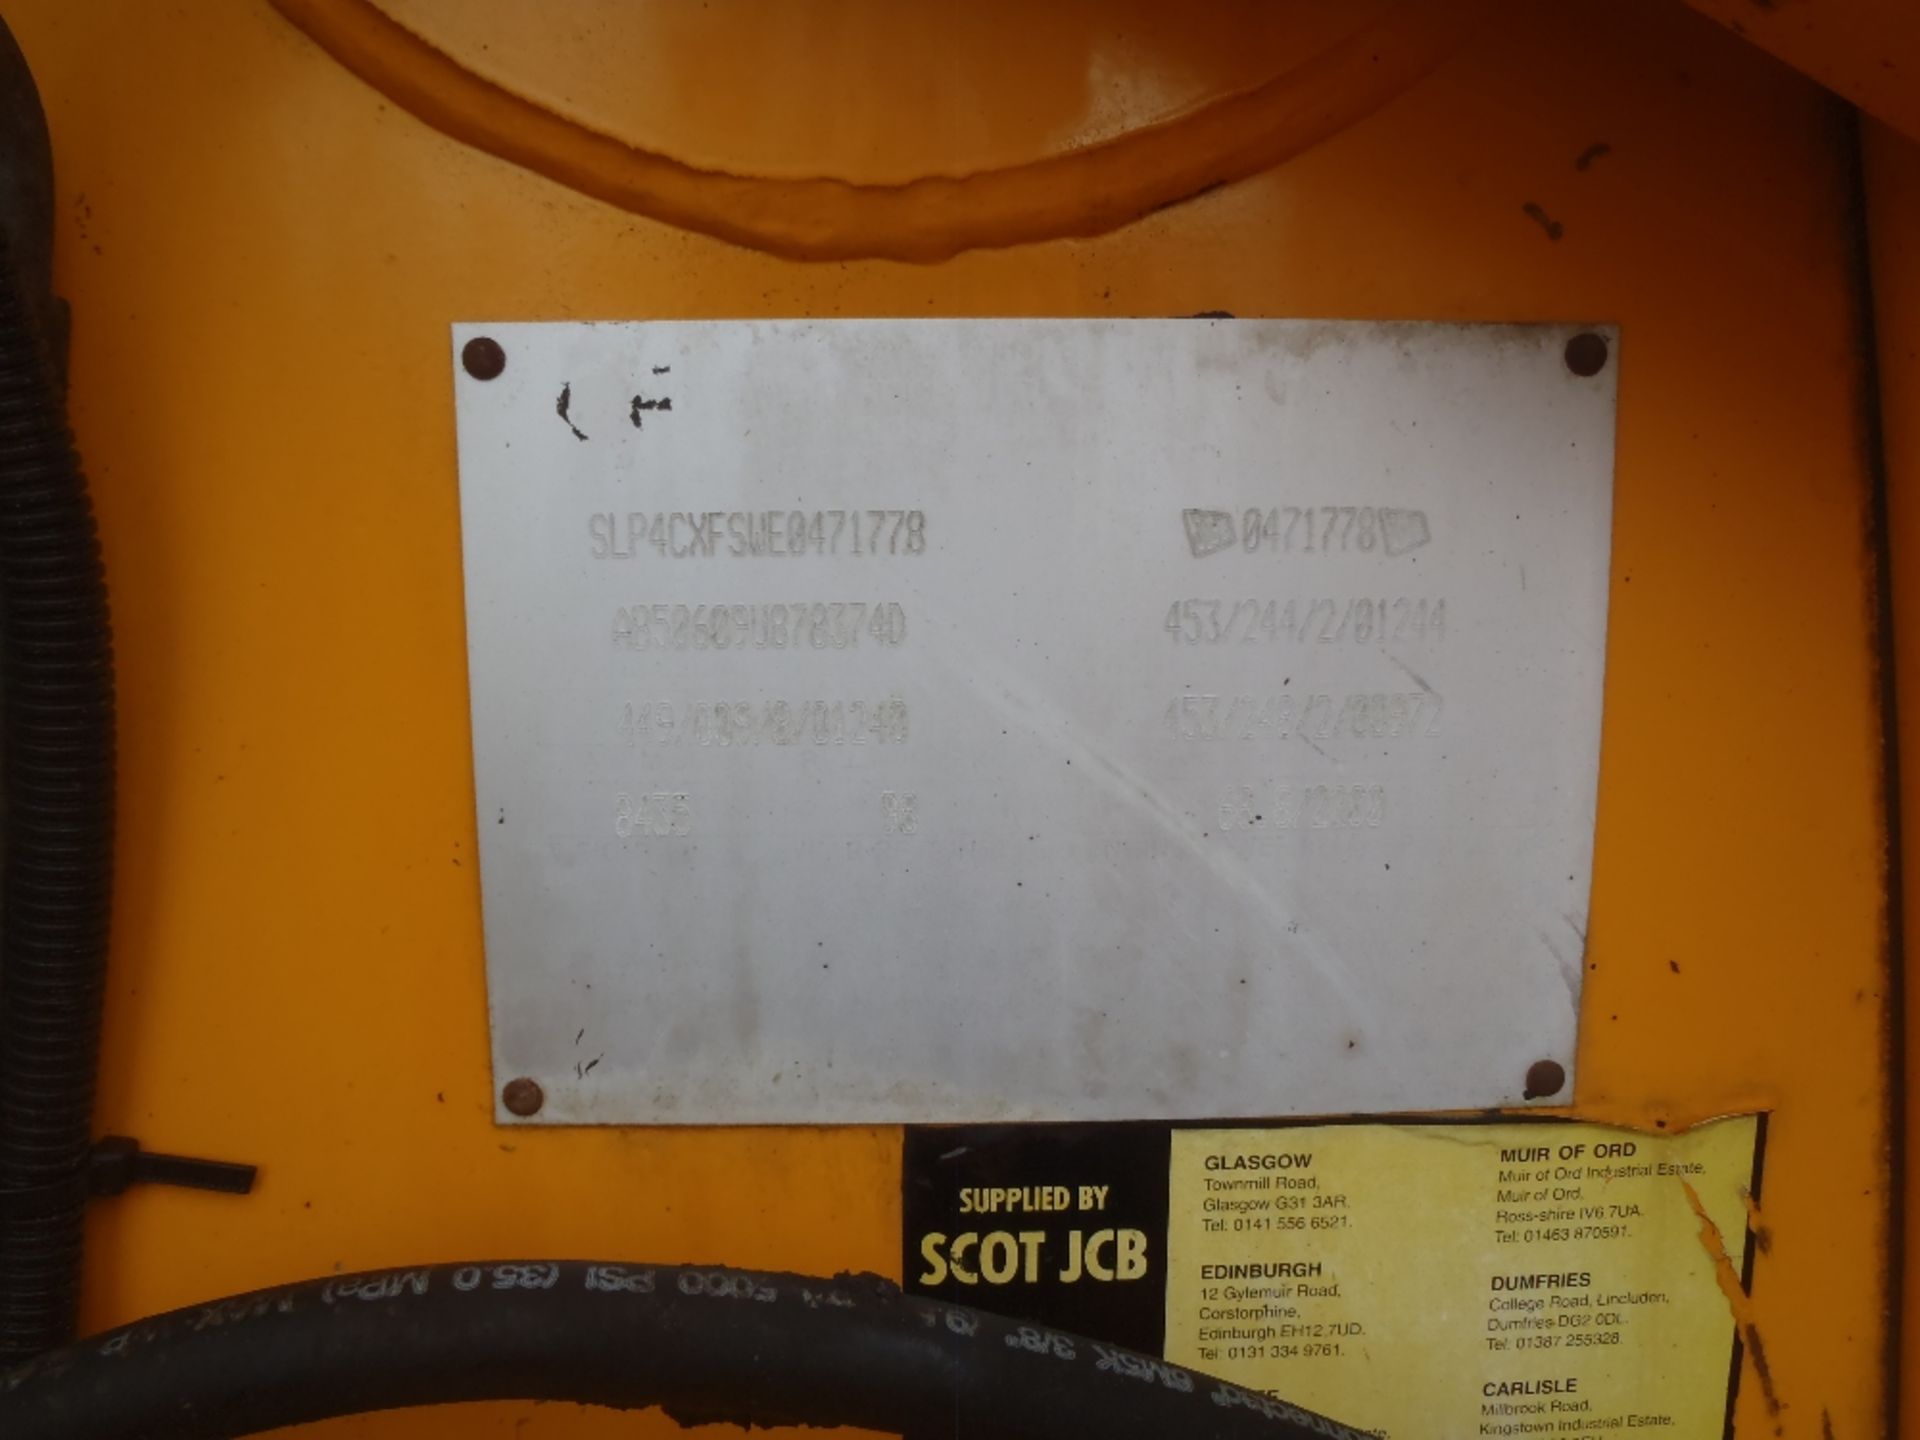 JCB 4CX 6030 Hrs. 1 owner from new. Reg No. R546 RRS Ser No 0471778 - Image 3 of 5